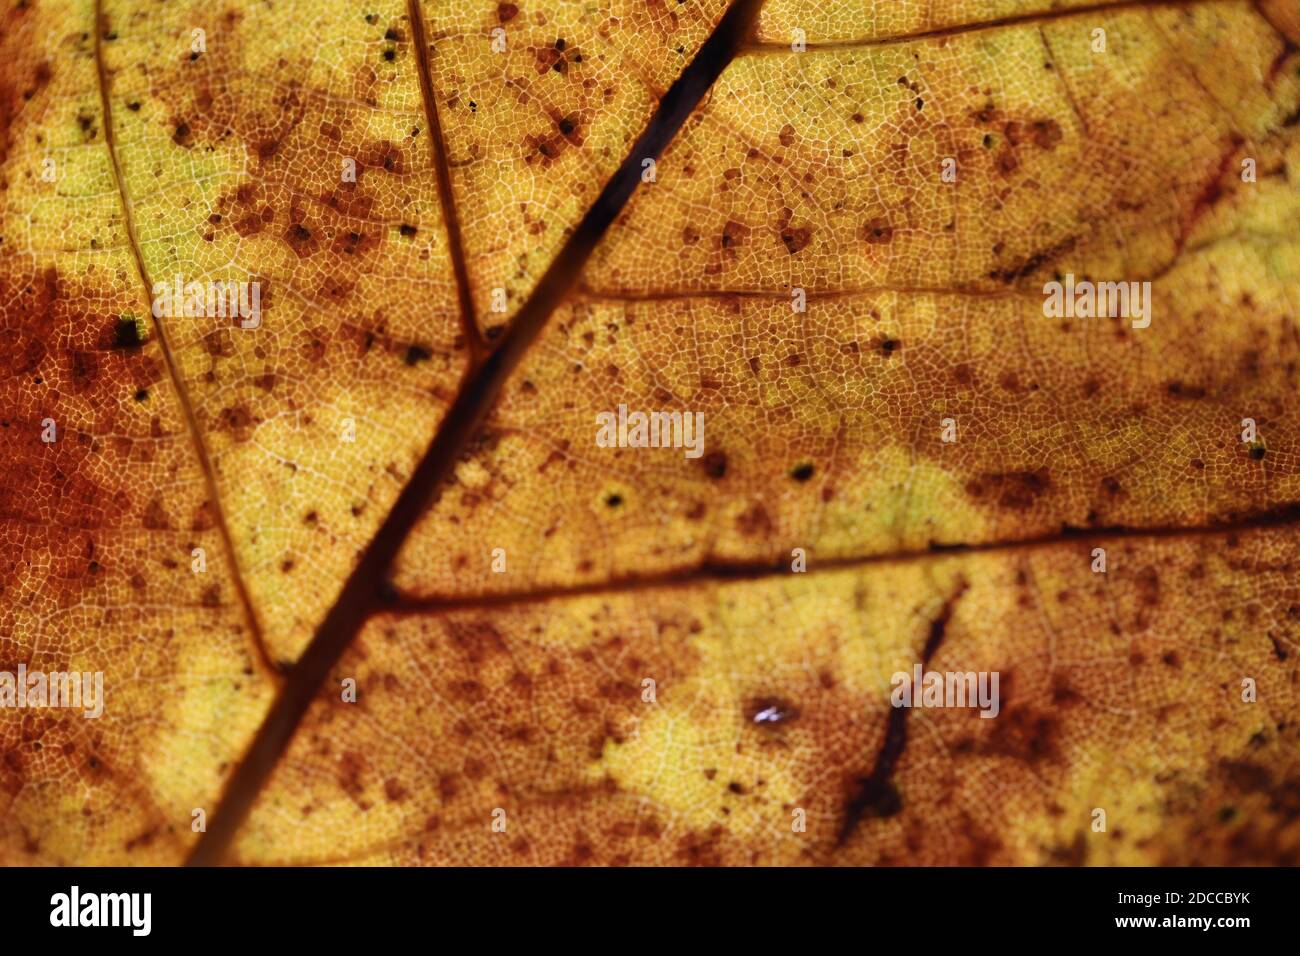 'Autumn Leaves' October 2020 Close up leaves and veins, taken with Canon 100mm Macro Lens Stock Photo